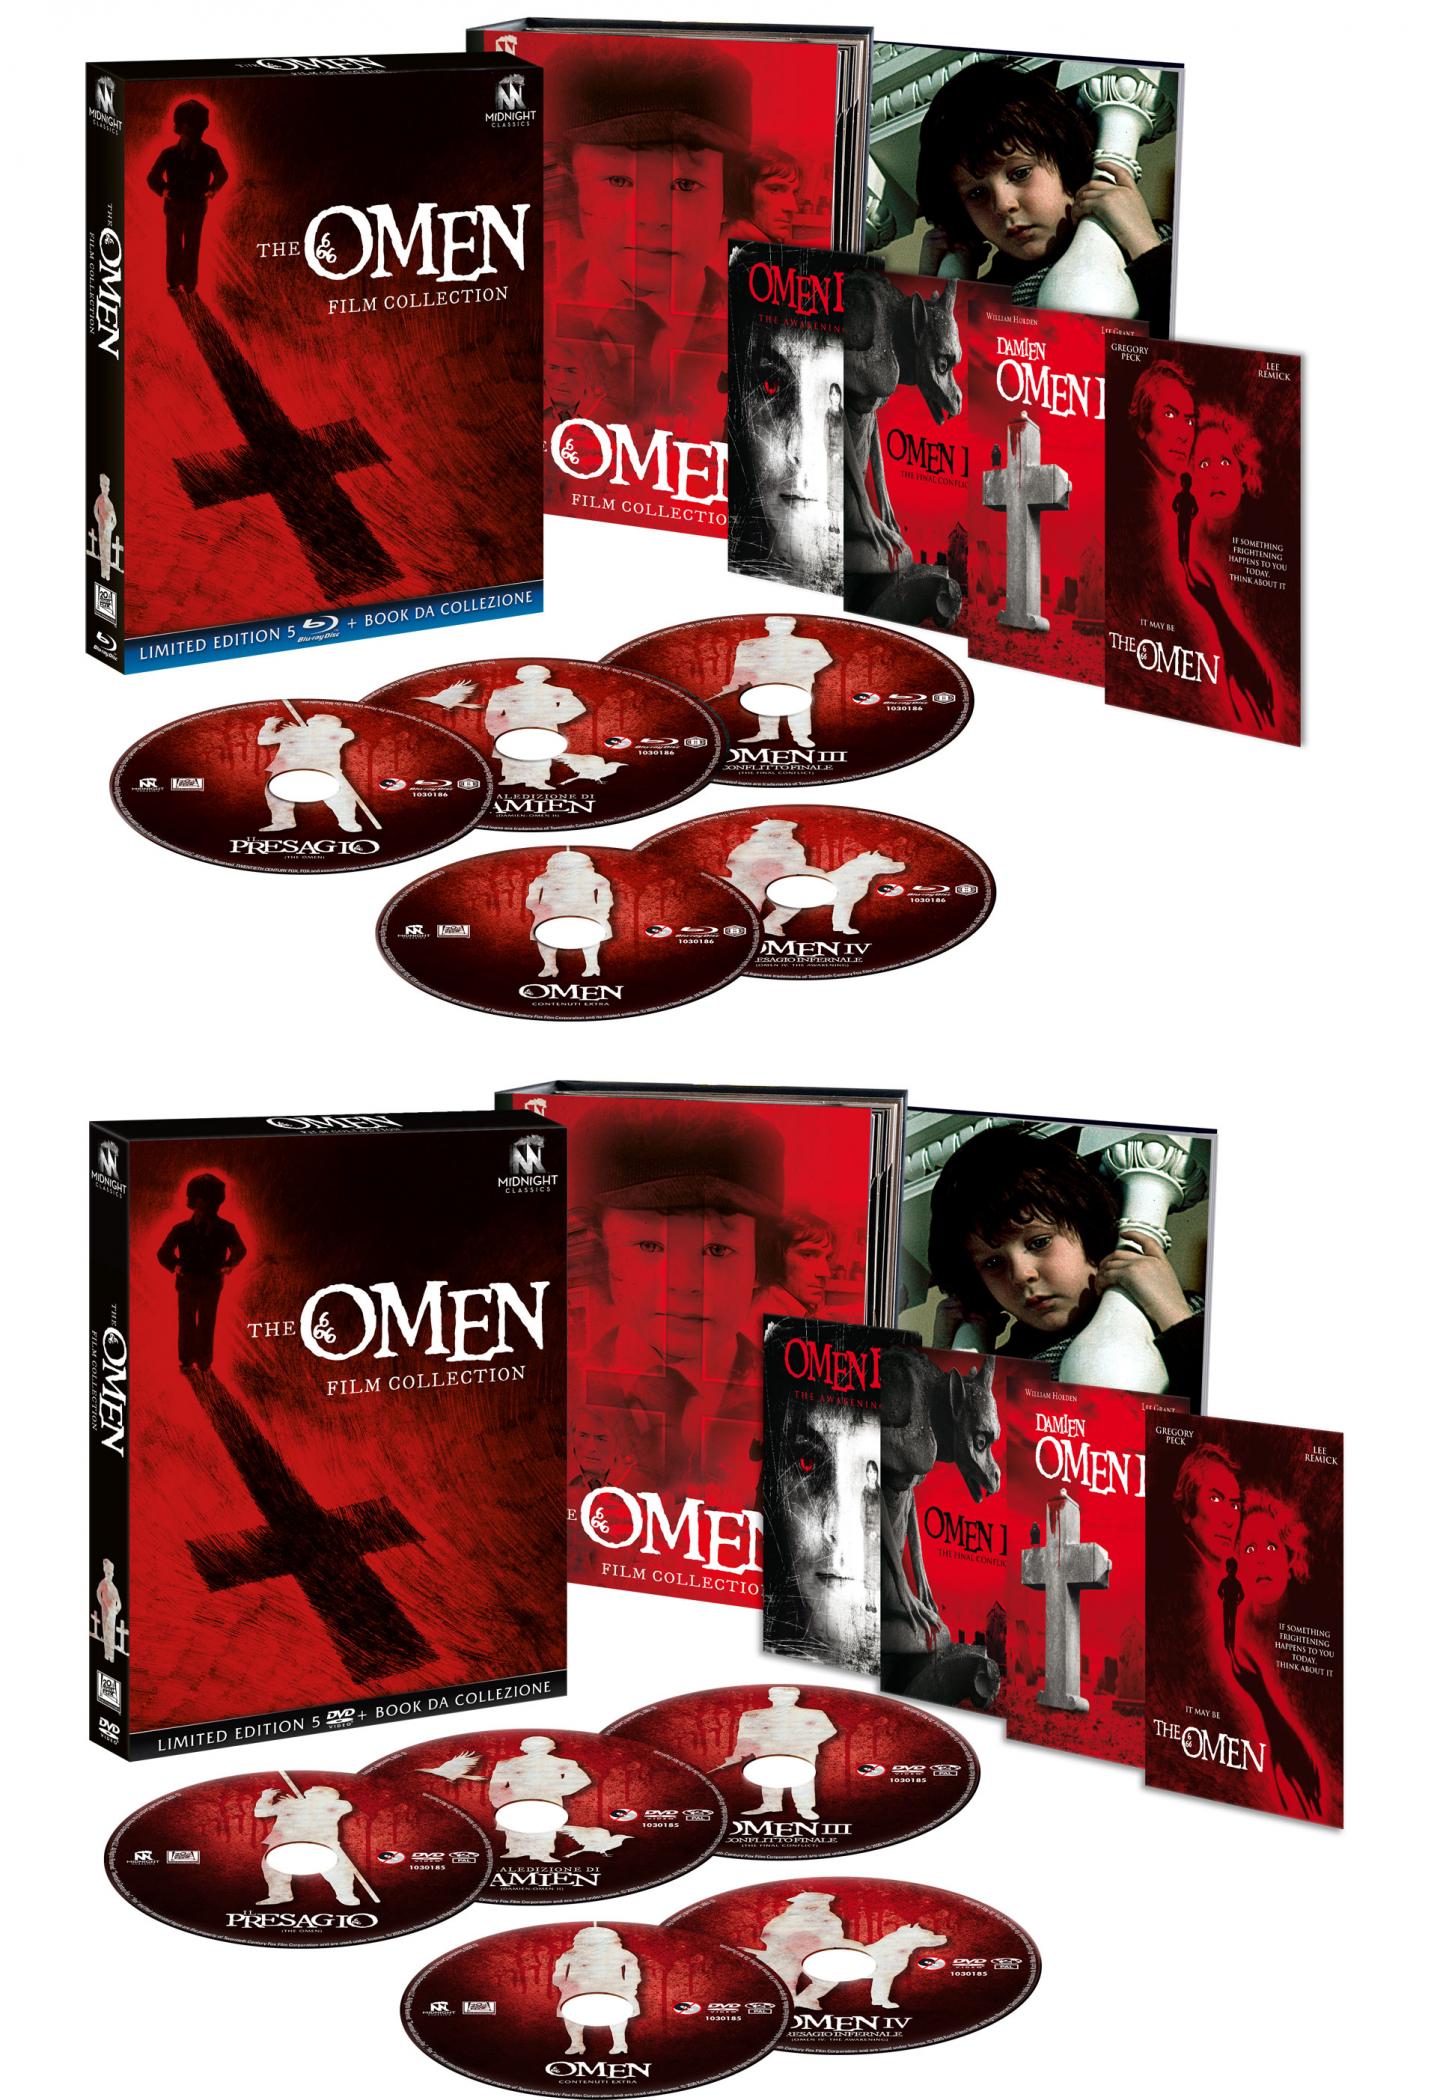 The Omen Film Collection